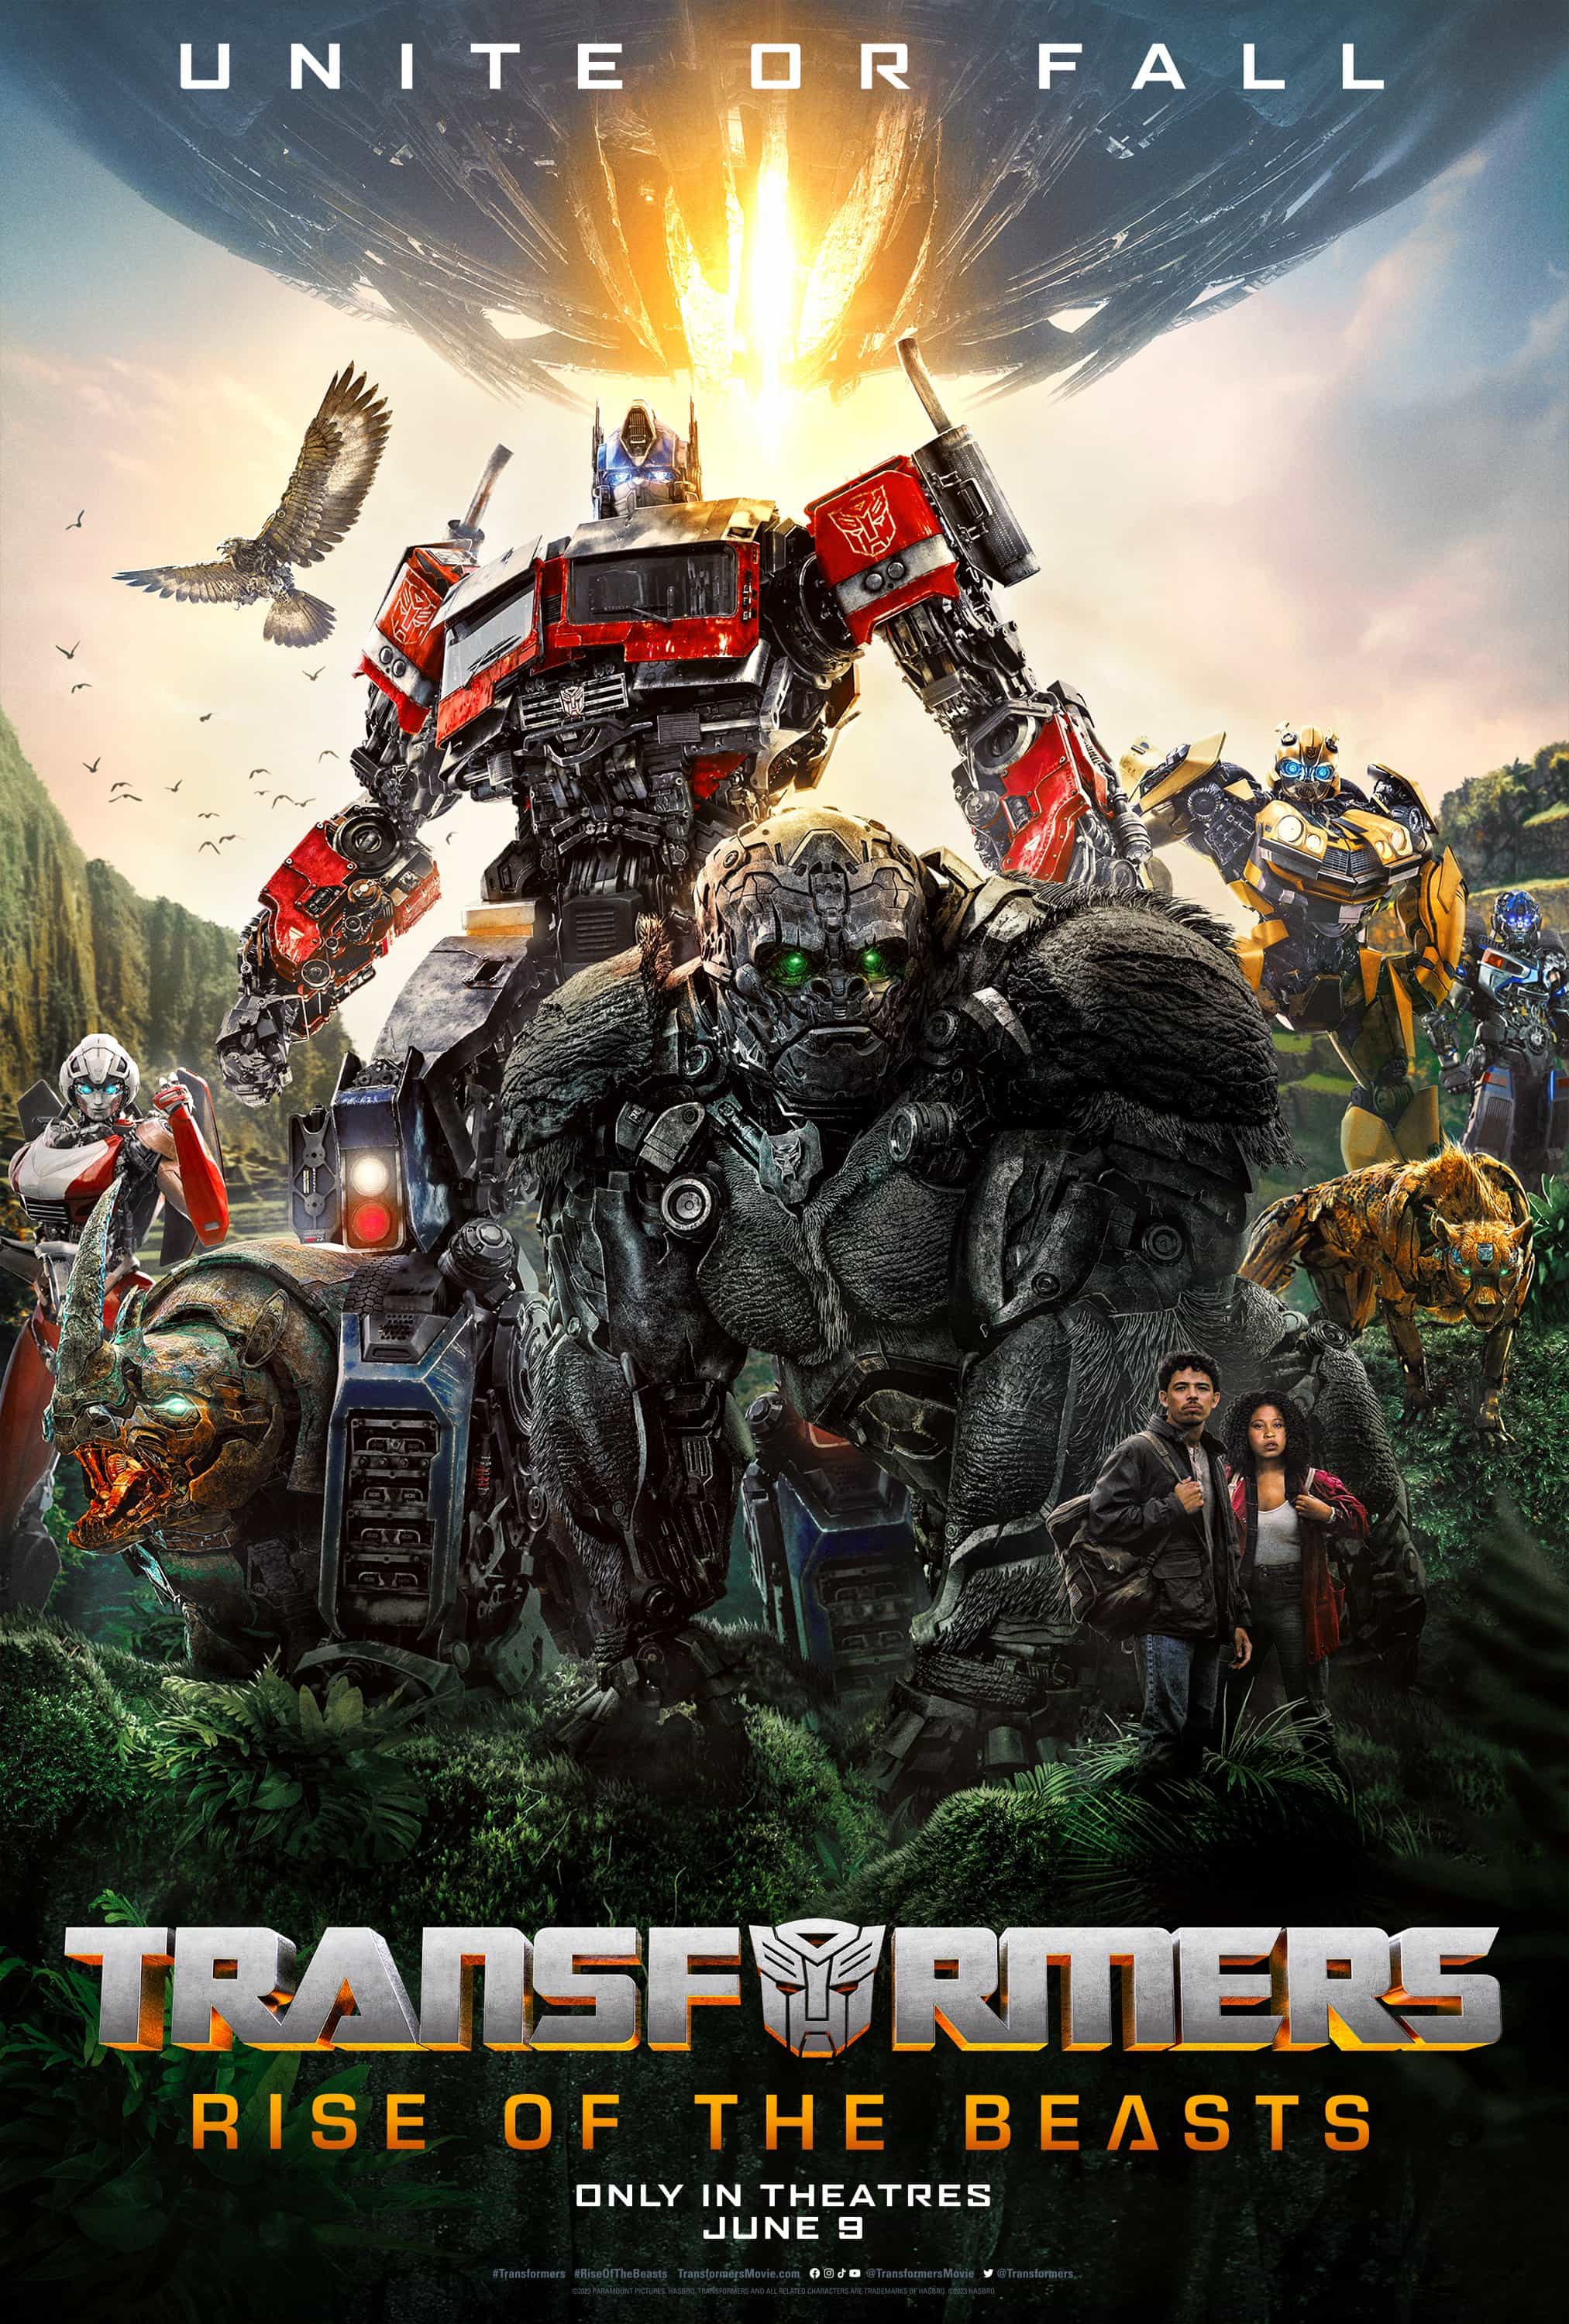 A new trailer and poster released for Transformers: Rise of the Beasts starring Michelle Yeoh - movie UK release date 9th June 2023 #transformersriseofthebeasts